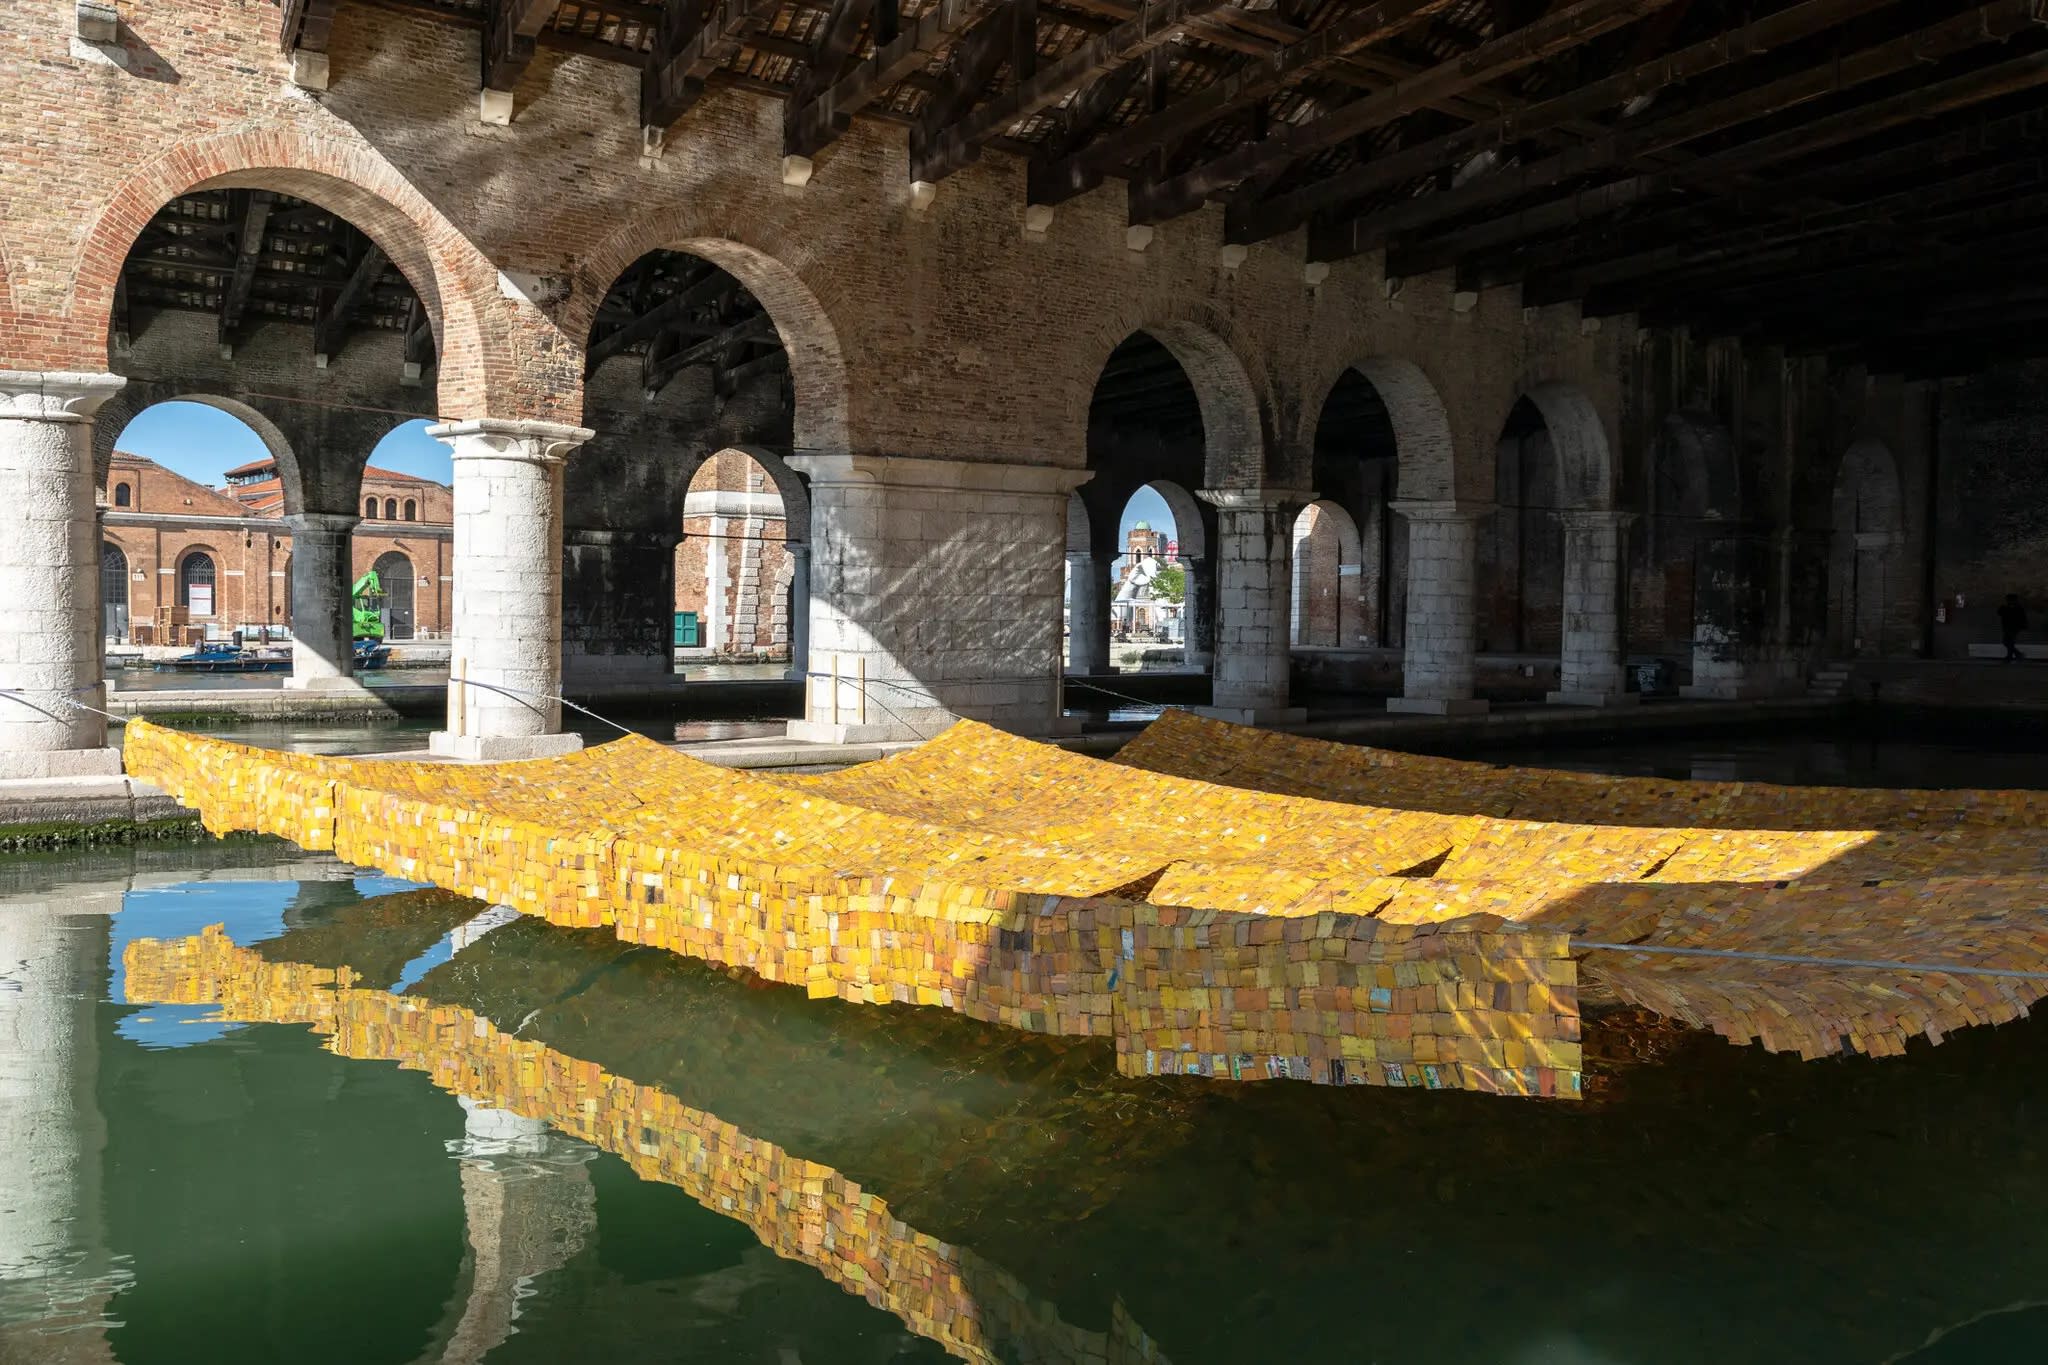 Pictured: 'Time and Chance' - Serge Attukwei Clottey at the Venice Architectural Biennale (2023). Photo courtesy Marco Zorzanello and the Venice Architectural Biennale.